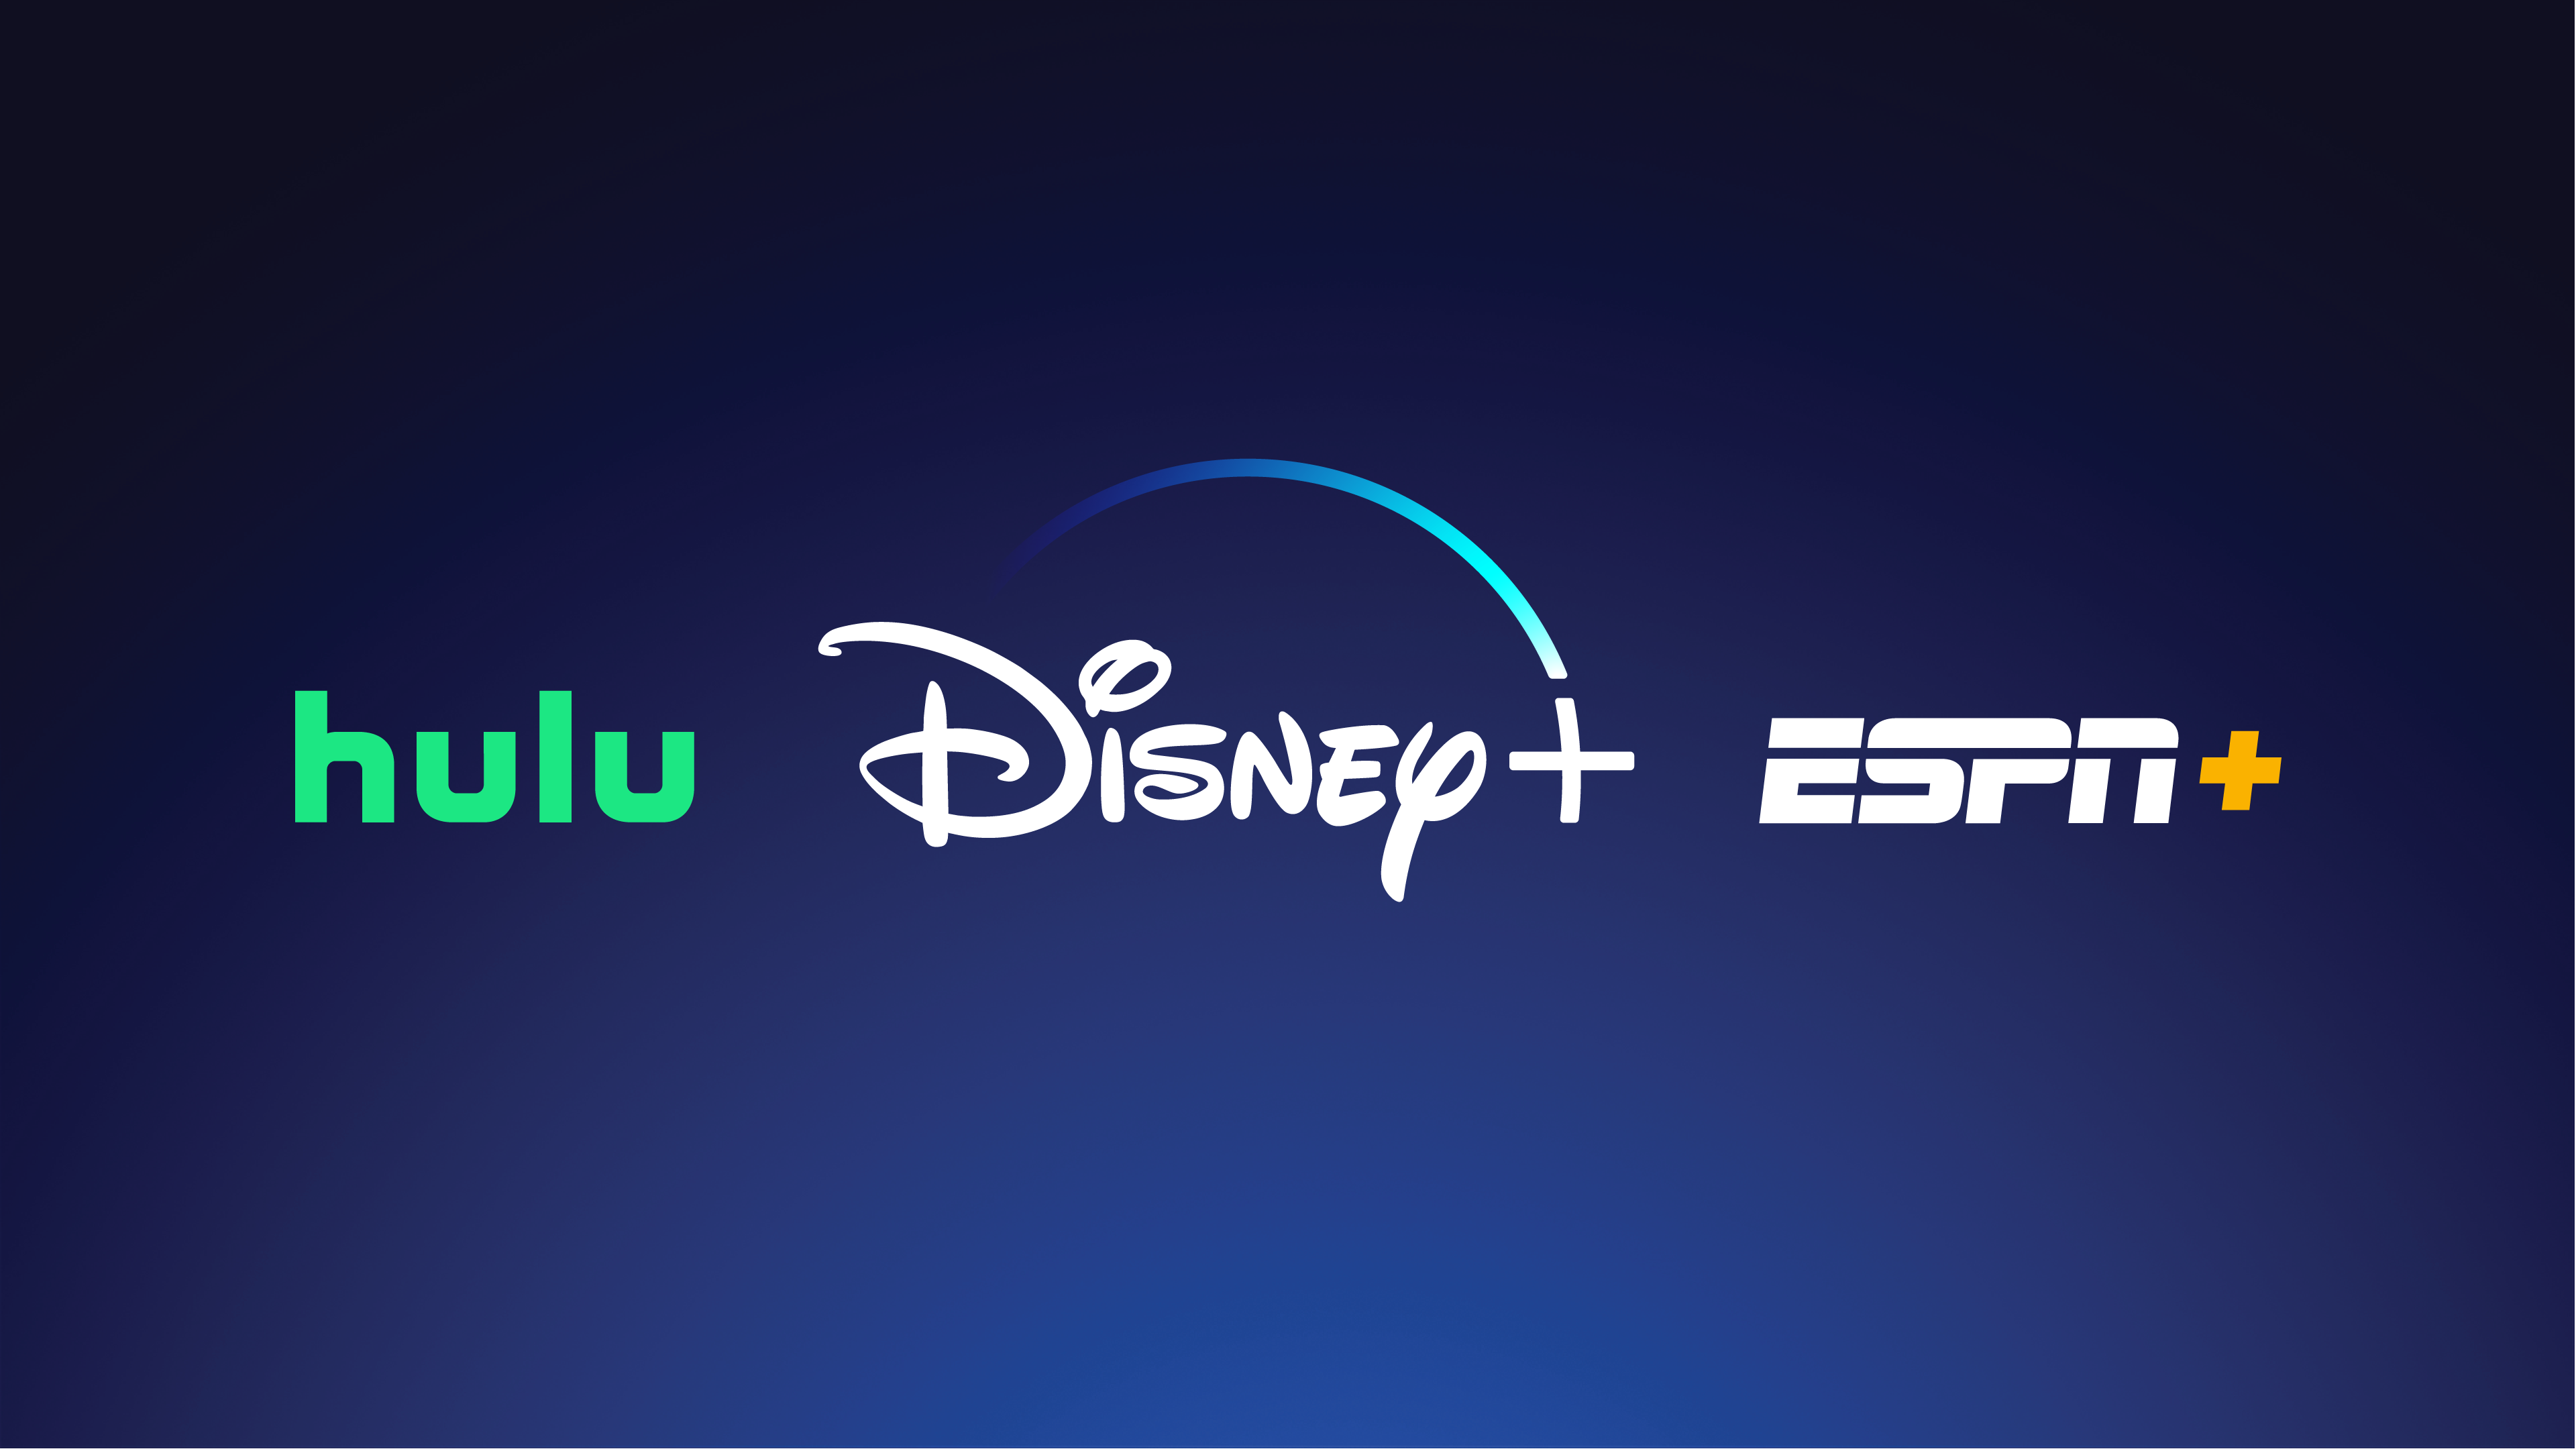 “The Mighty Ducks” Trilogy Is Now Streaming On Hulu And ESPN+ Ahead Of Series Premiere Of “The Mighty Ducks: Game Changers” On Disney+ On March 26 